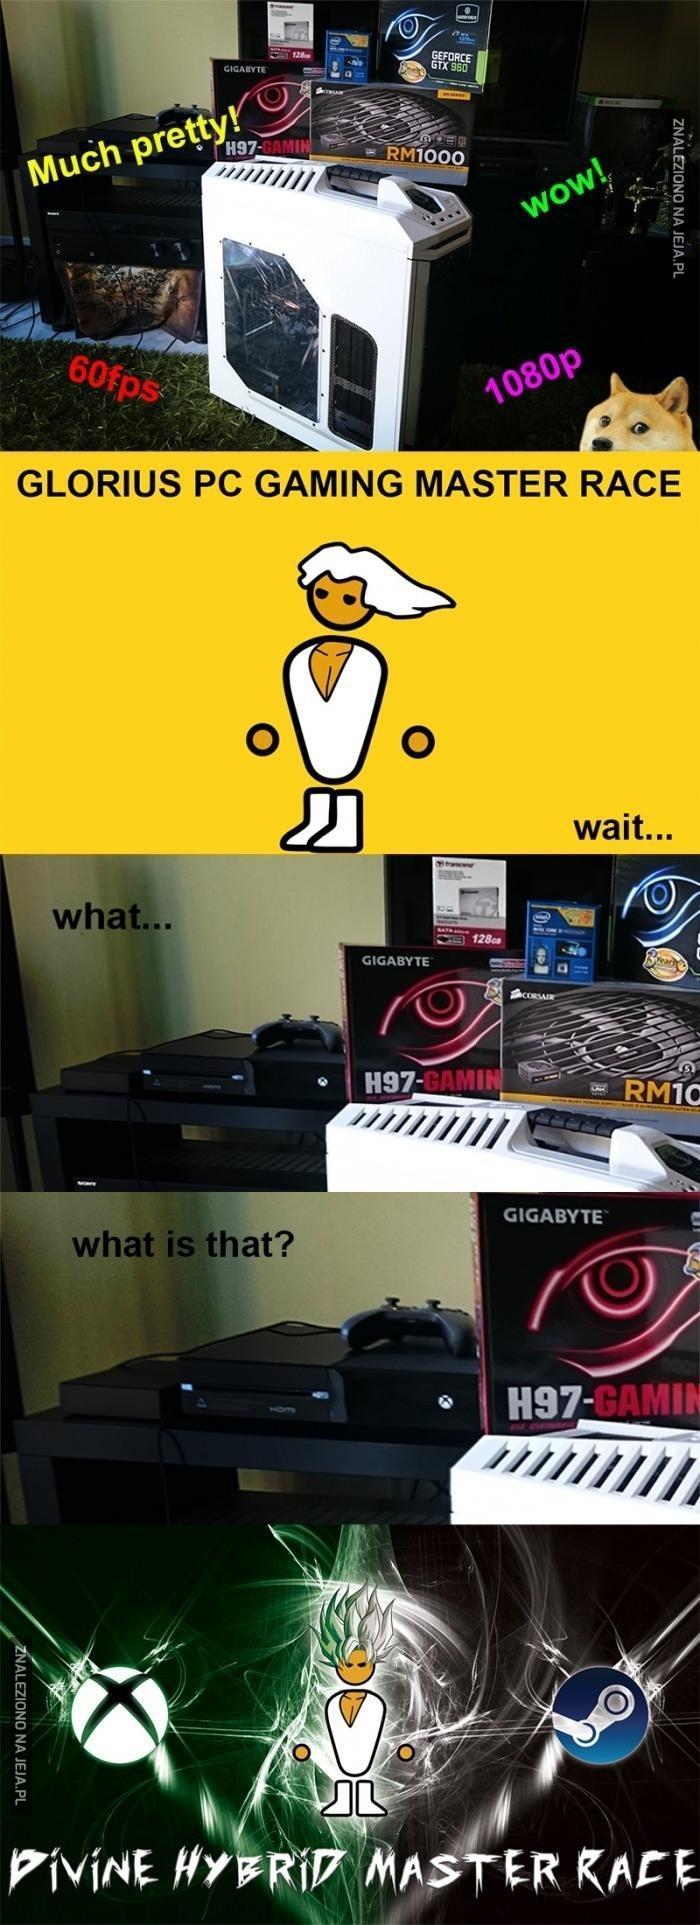 PC Master Race... Nie? To co?